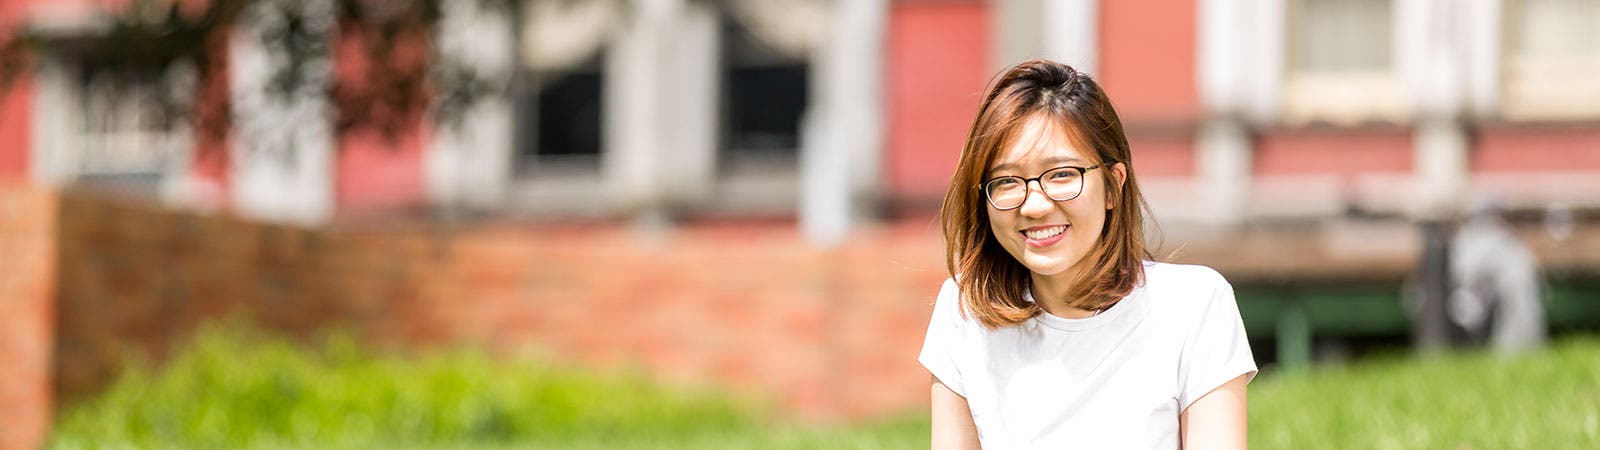 Student smiling sitting on grass outside campus